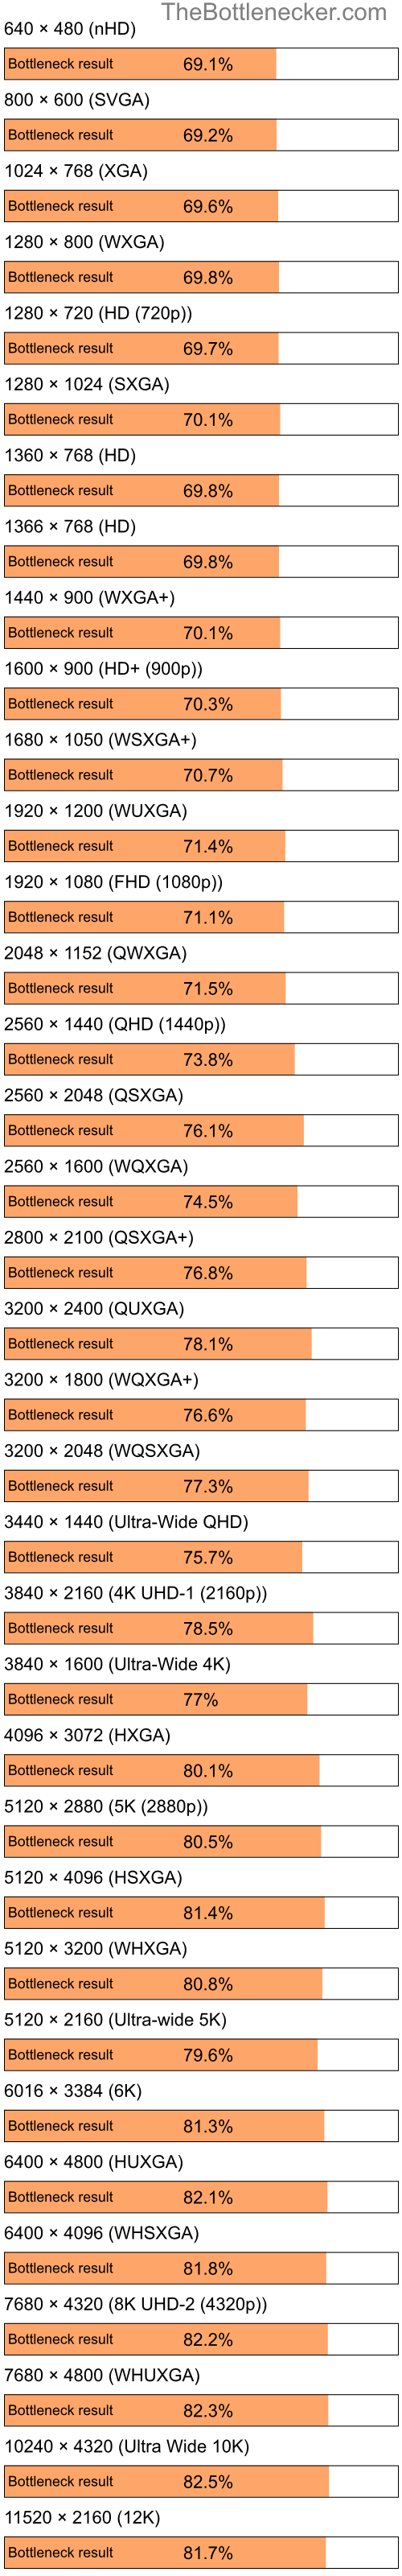 Bottleneck results by resolution for Intel Atom Z520 and NVIDIA Quadro FX 3000 in7 Days to Die